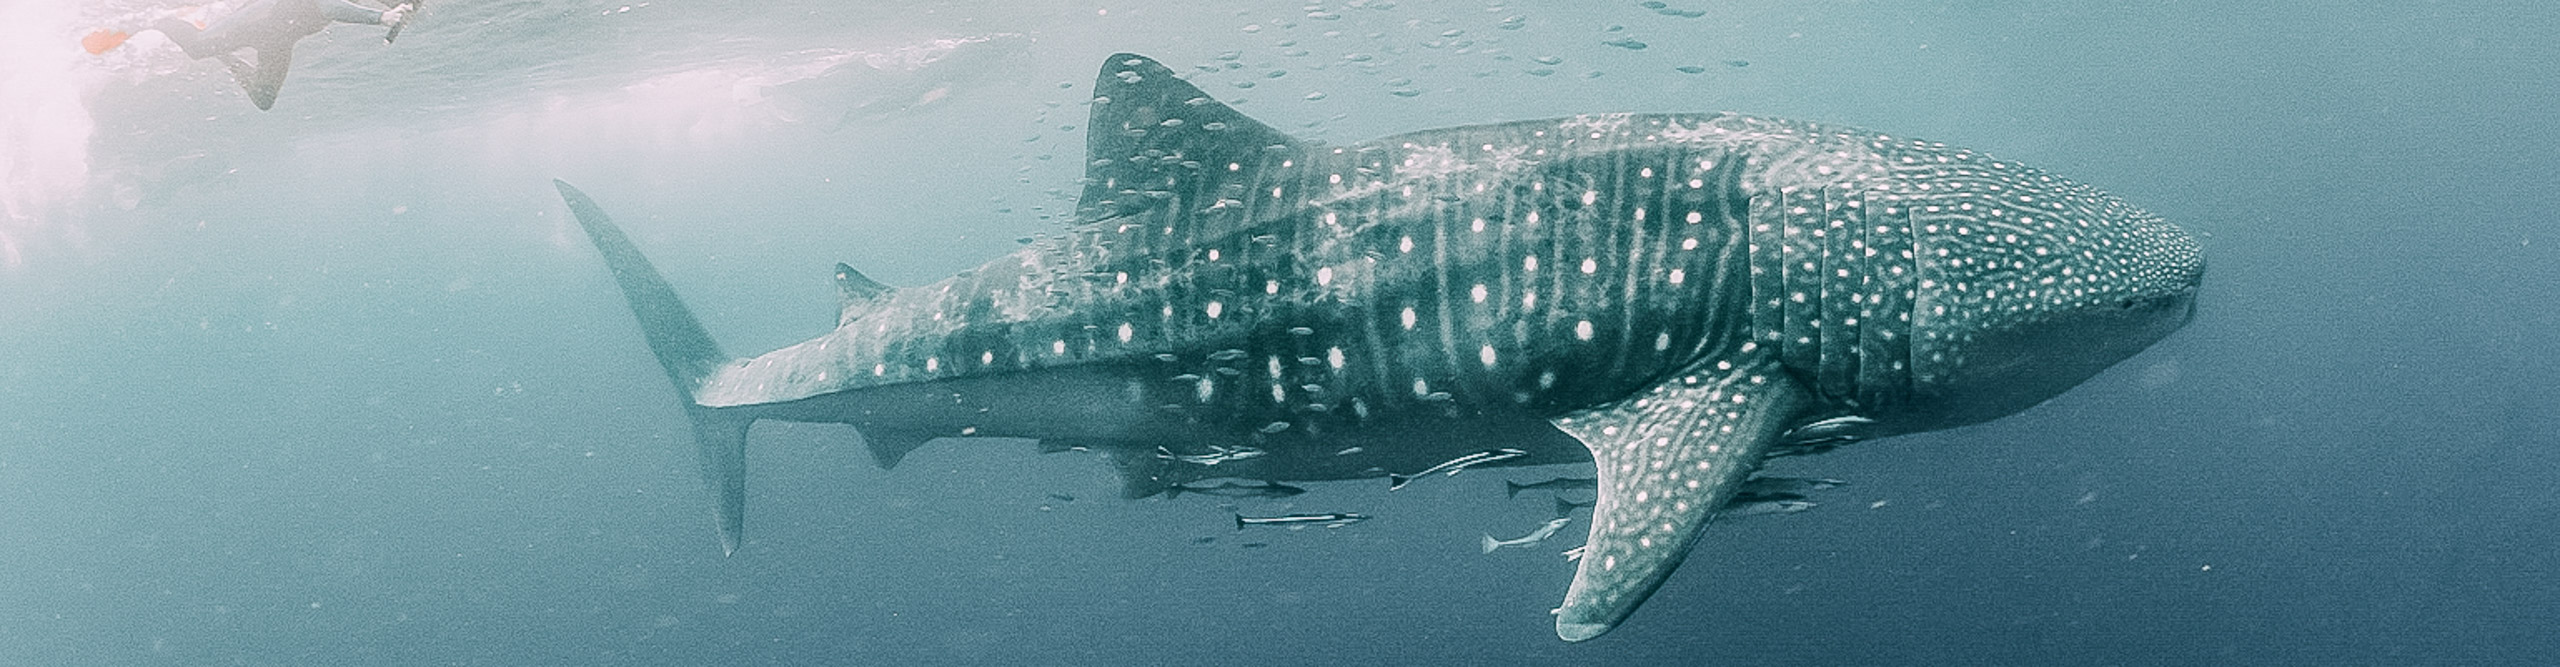 Scuba diver swimming with a whale shark at Ningaloo Reef, Western Australia 